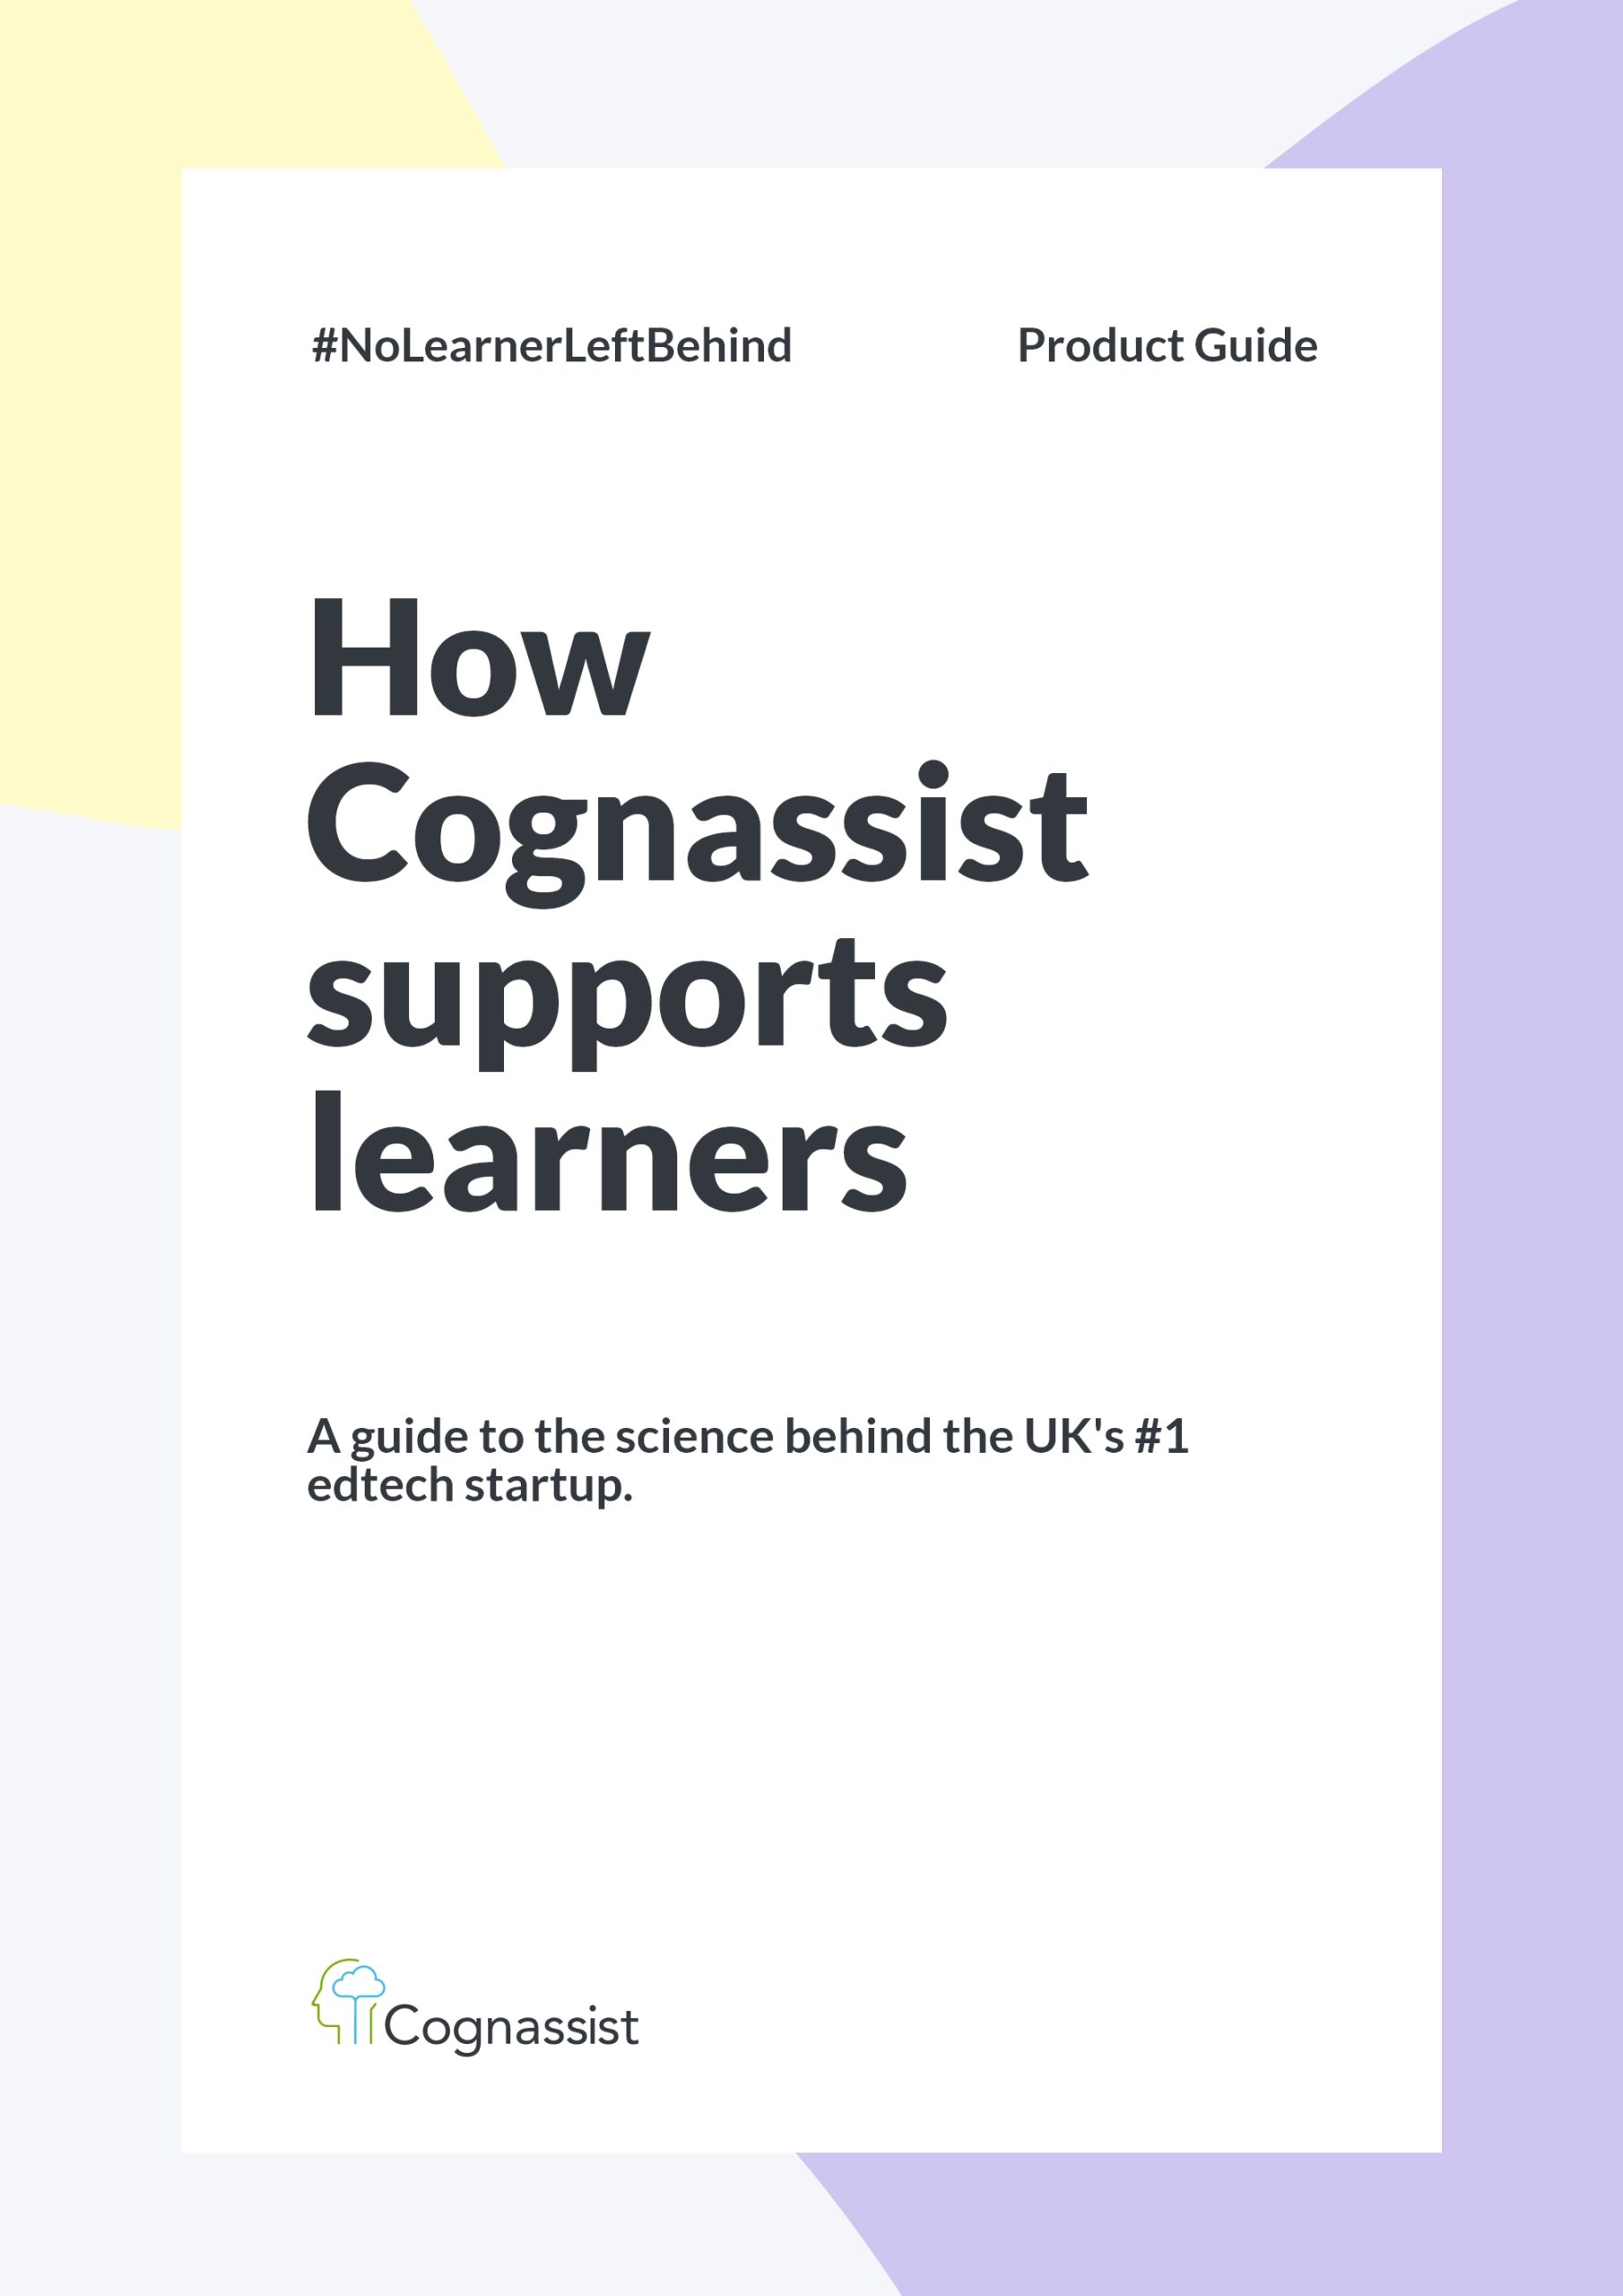 Image: How Cognassist supports learners handbook cover